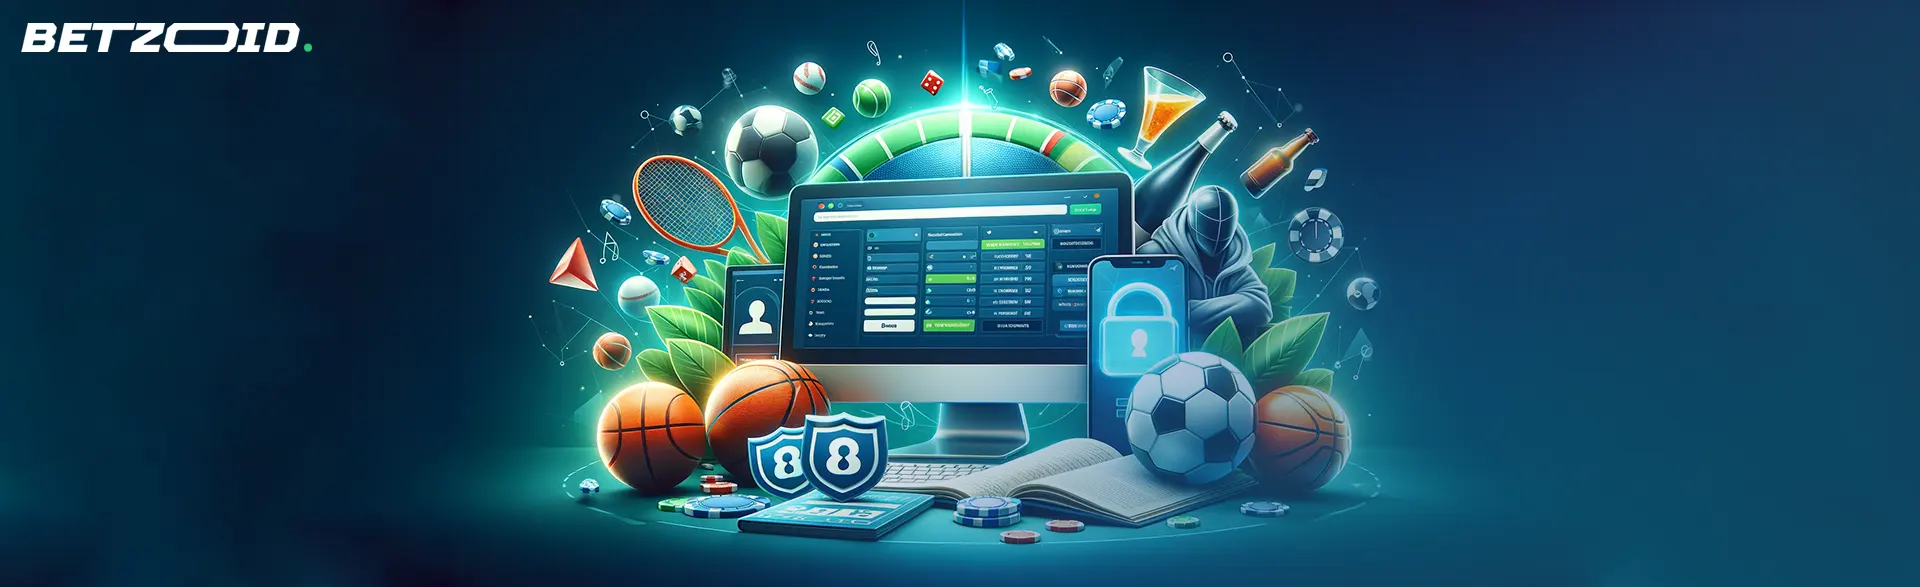 Online sports betting platform interface without ID verification requirement.